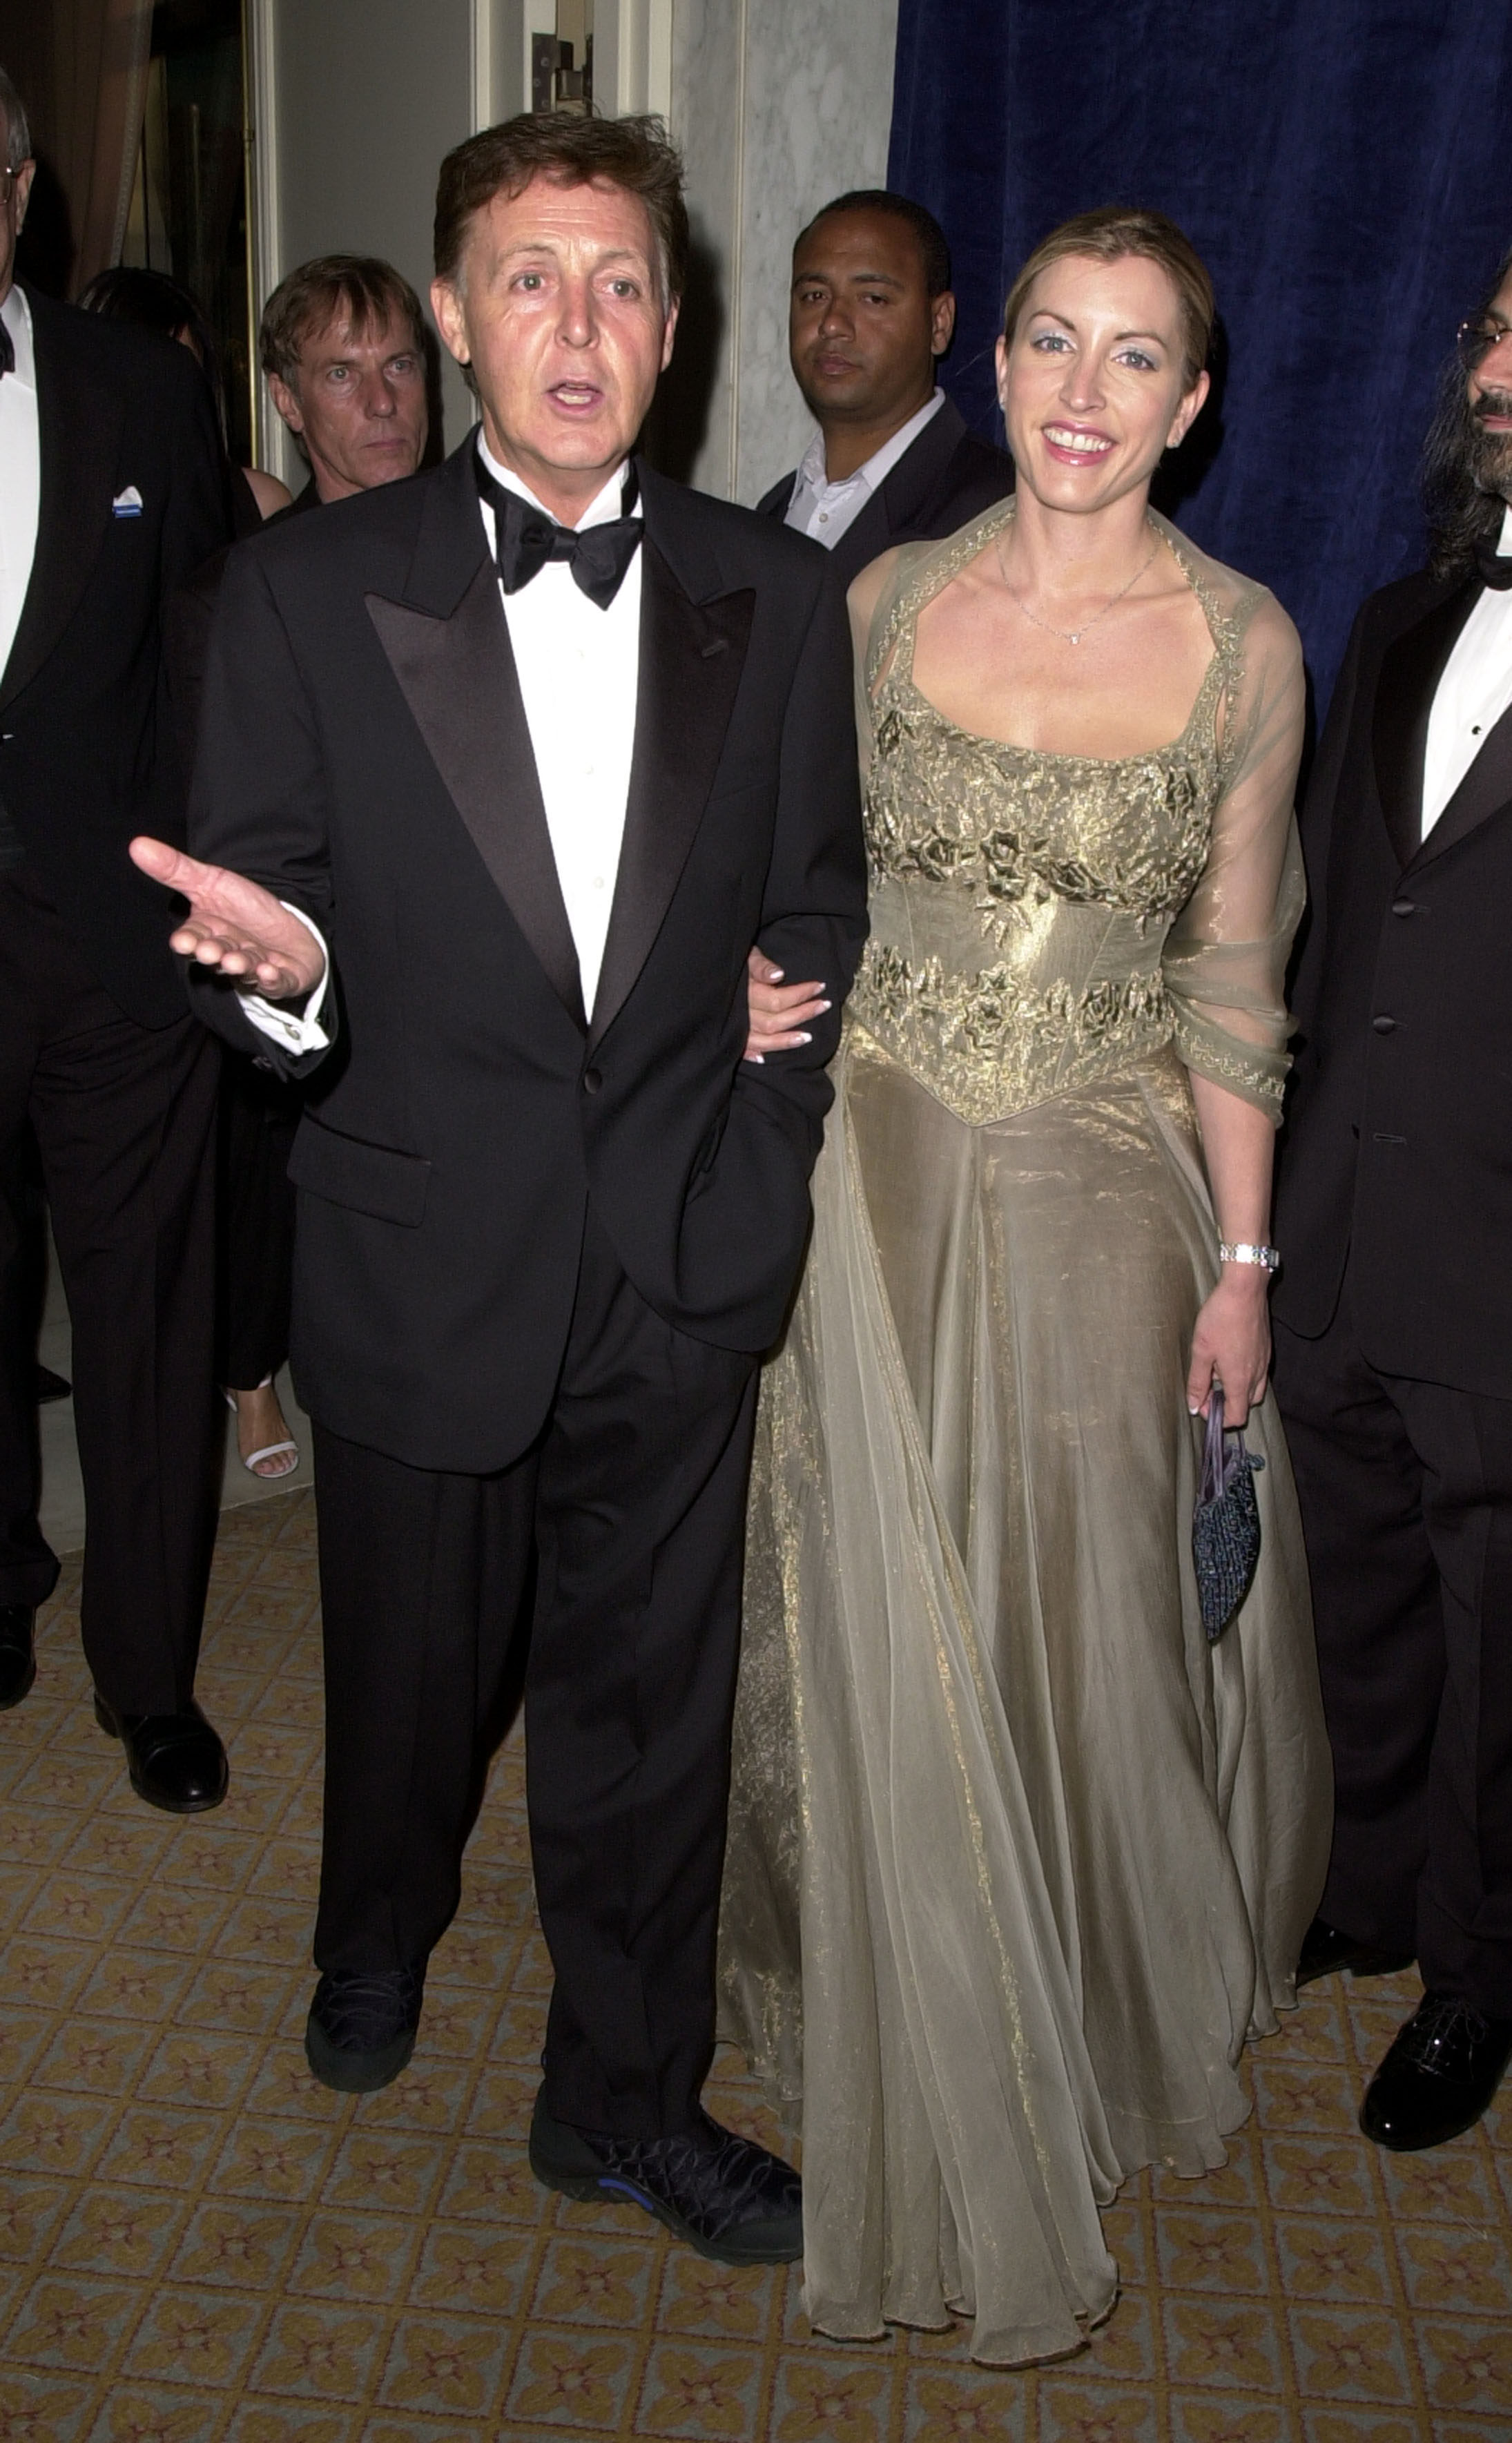 Paul McCartney and Heather Mills at the 1st Annual Dinner & Humanitarian Award on June 14, 2001 | Source: Getty Images